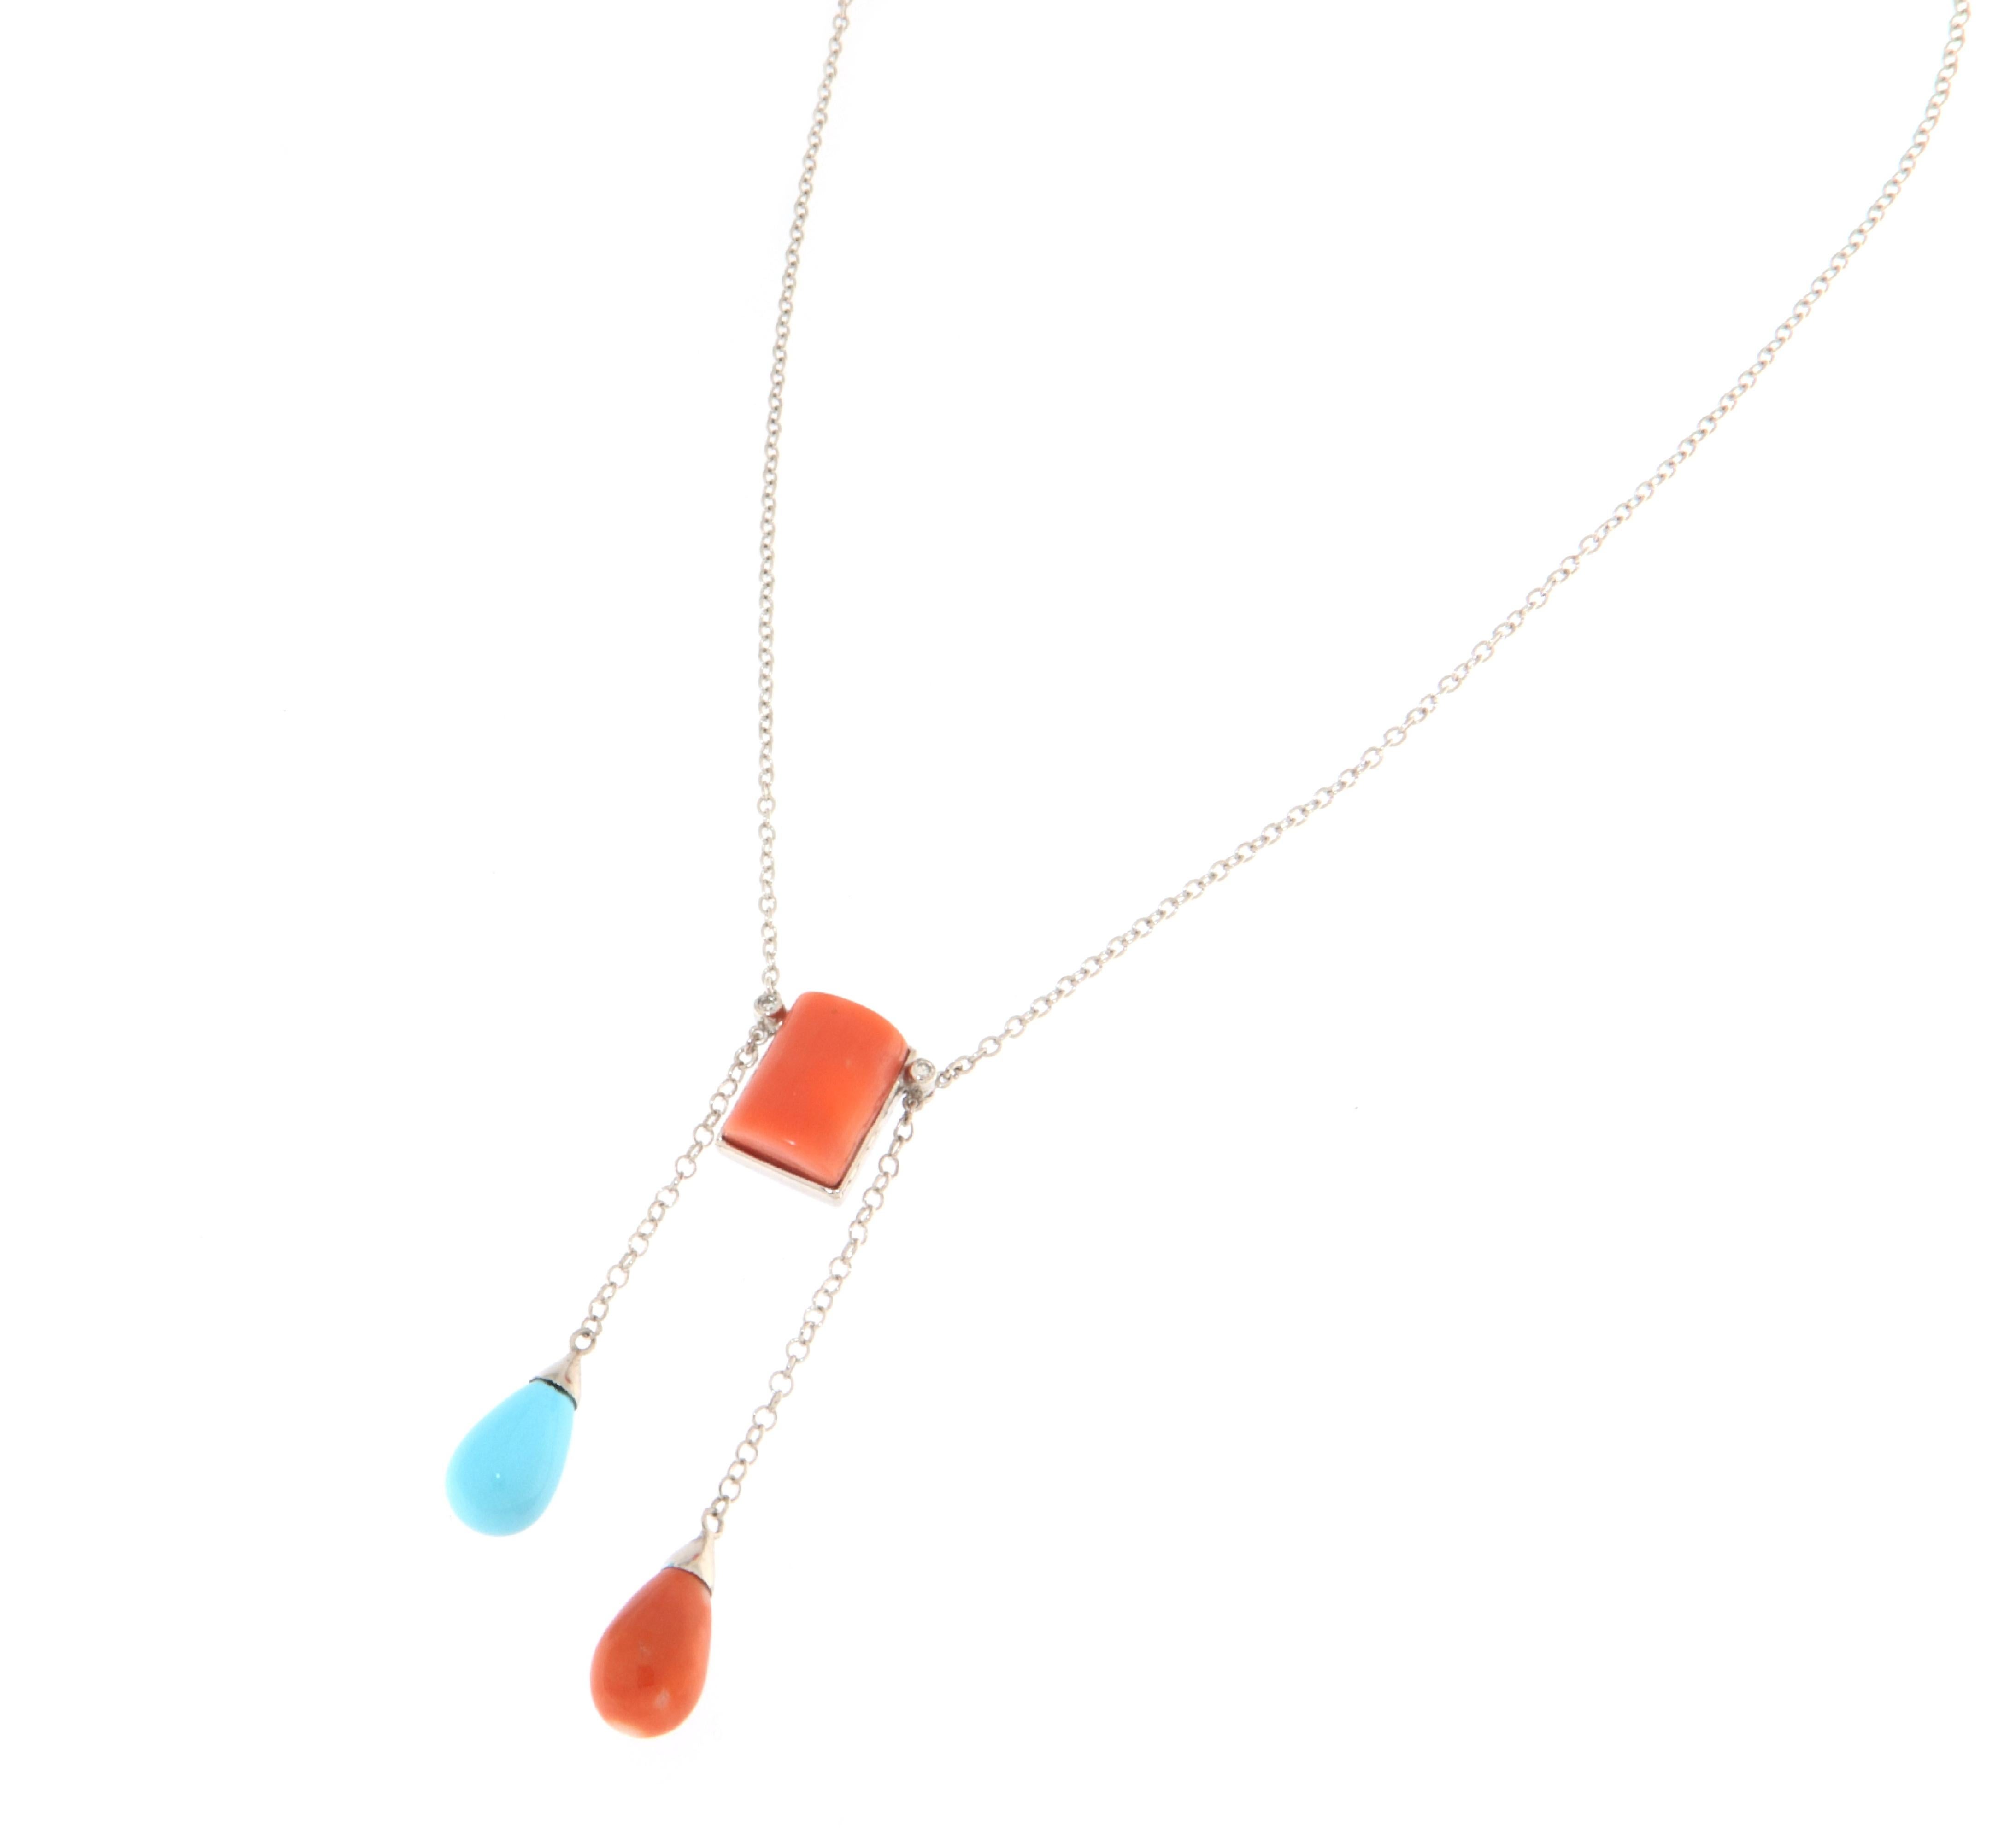 This necklace in 18-karat white gold is a triumph of color and sophistication, celebrating the unique beauty of natural gems in a contemporary design. At the center, an orange coral cut in a rectangular shape of approximately 14 mm dominates the